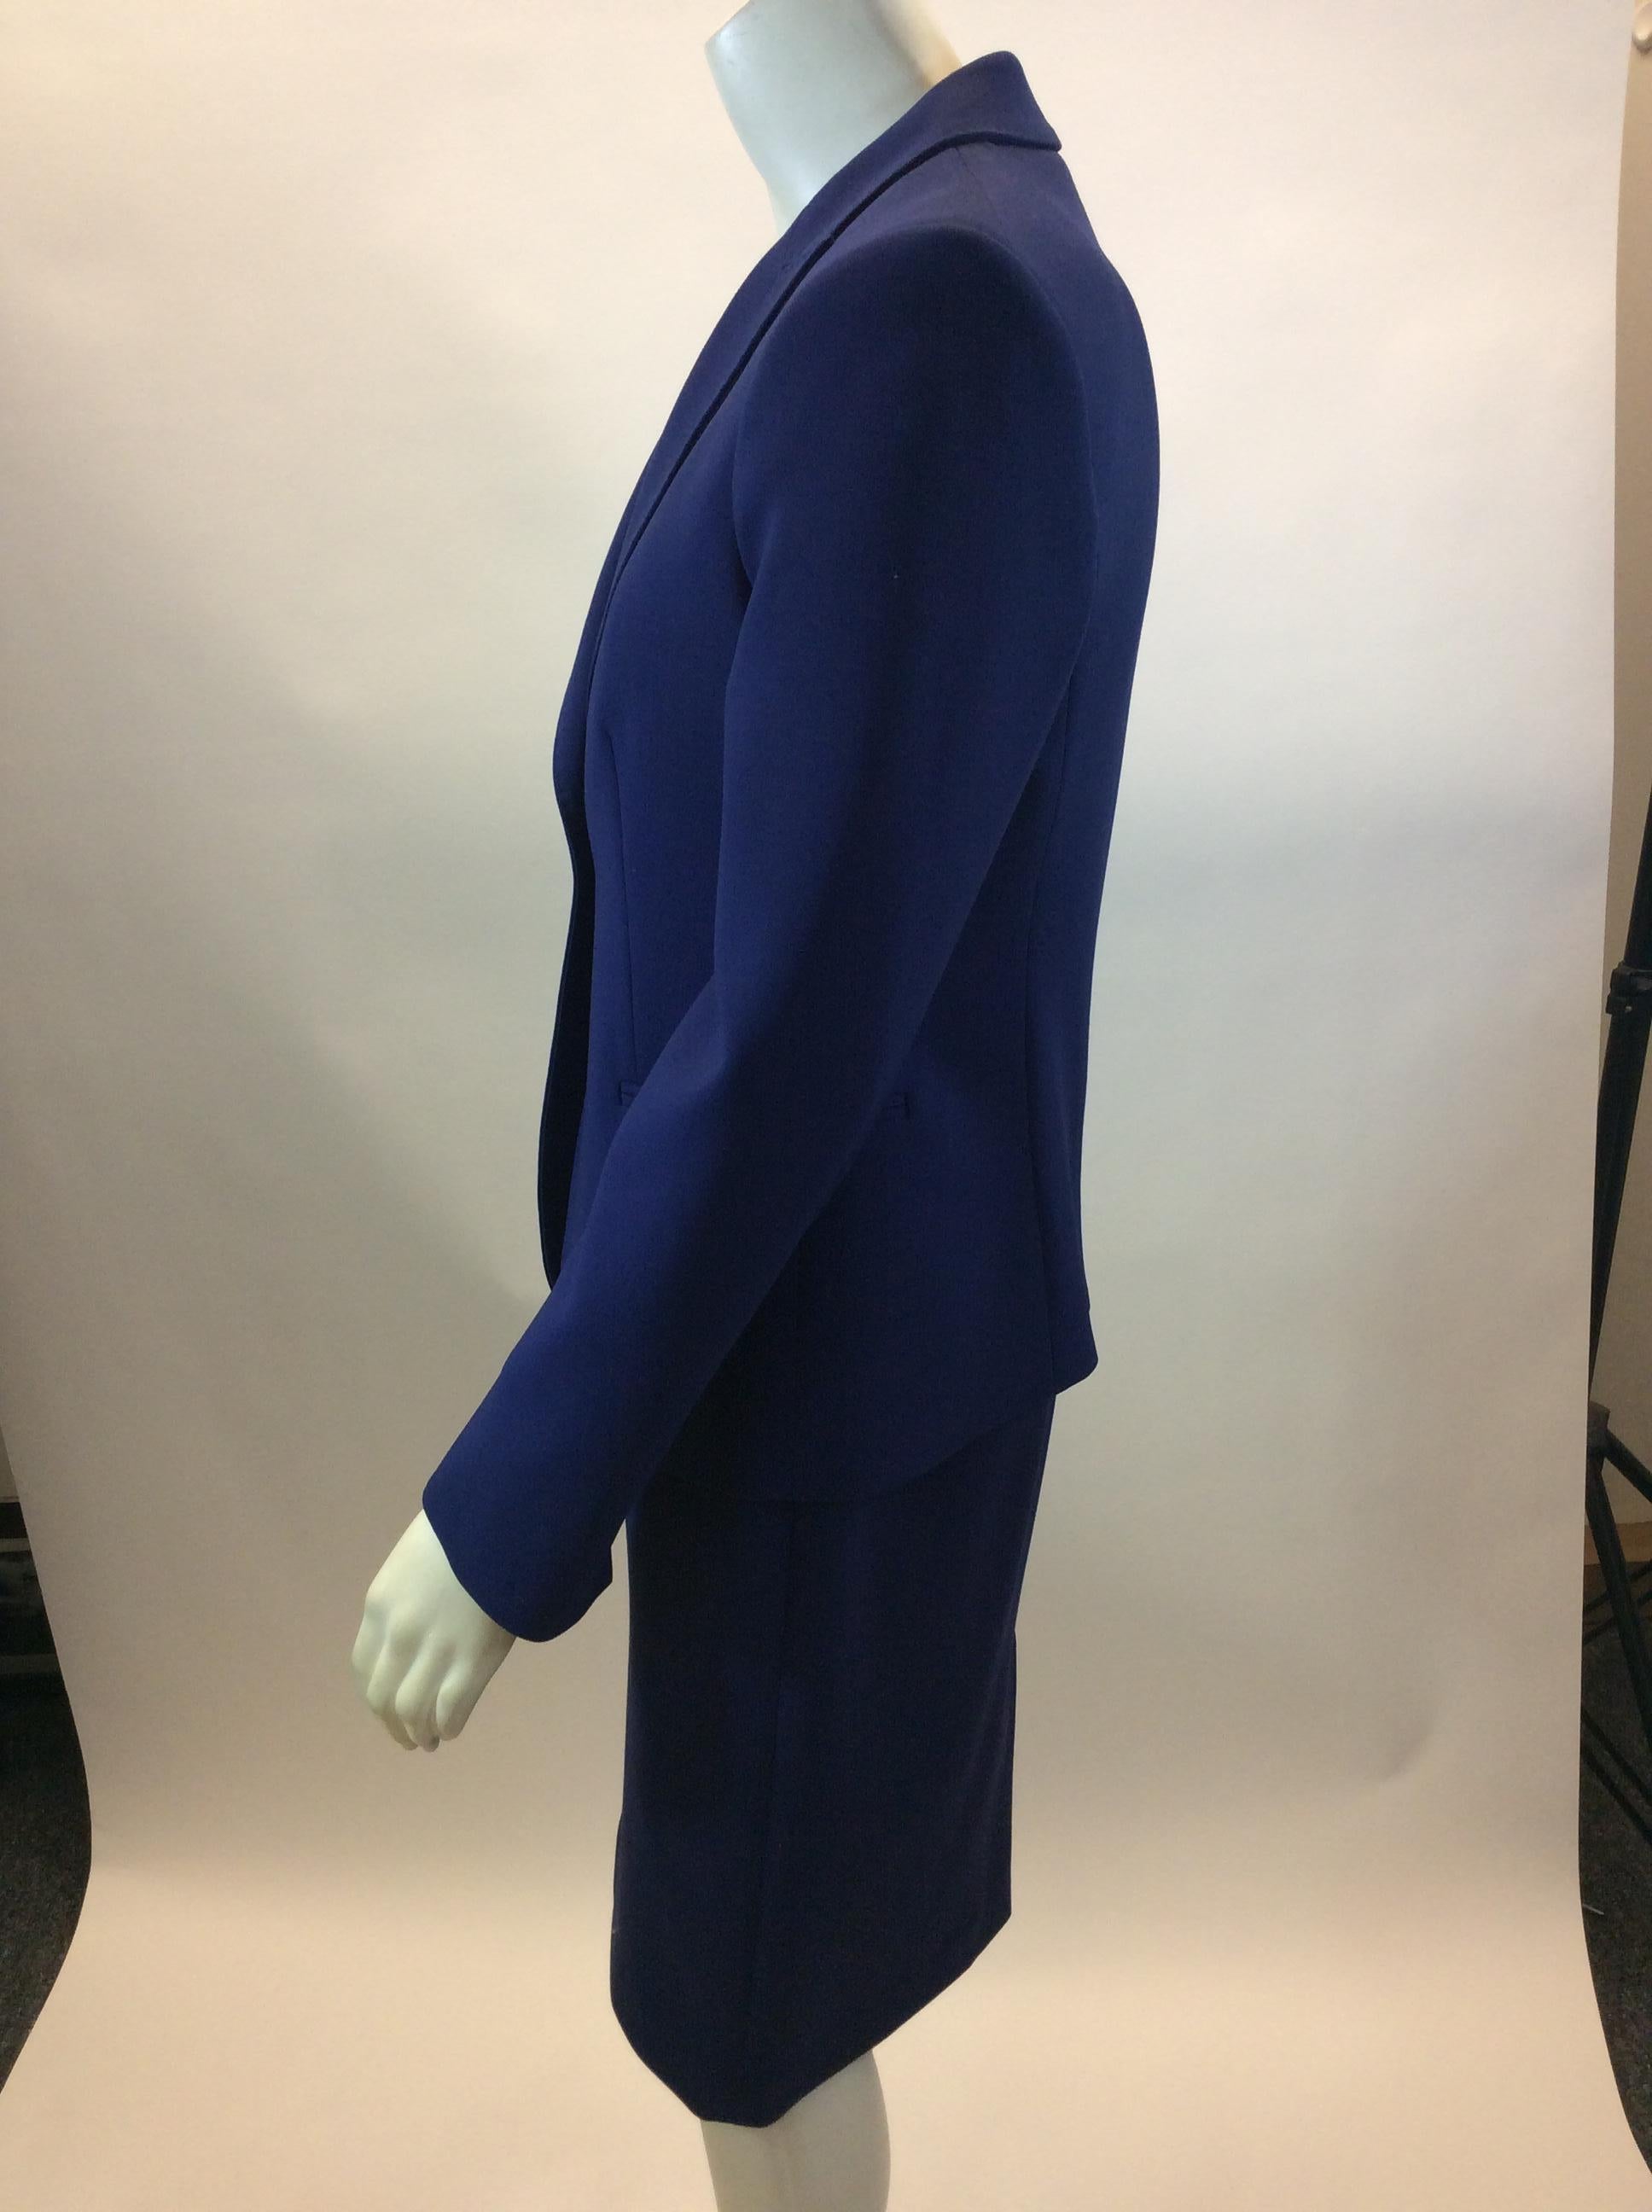 Max Mara Navy Blue Two Piece Dress Set
$389
Made in Italy
97% Wool, 3% Elastane
Size 6
Dress: 
Length 38.5